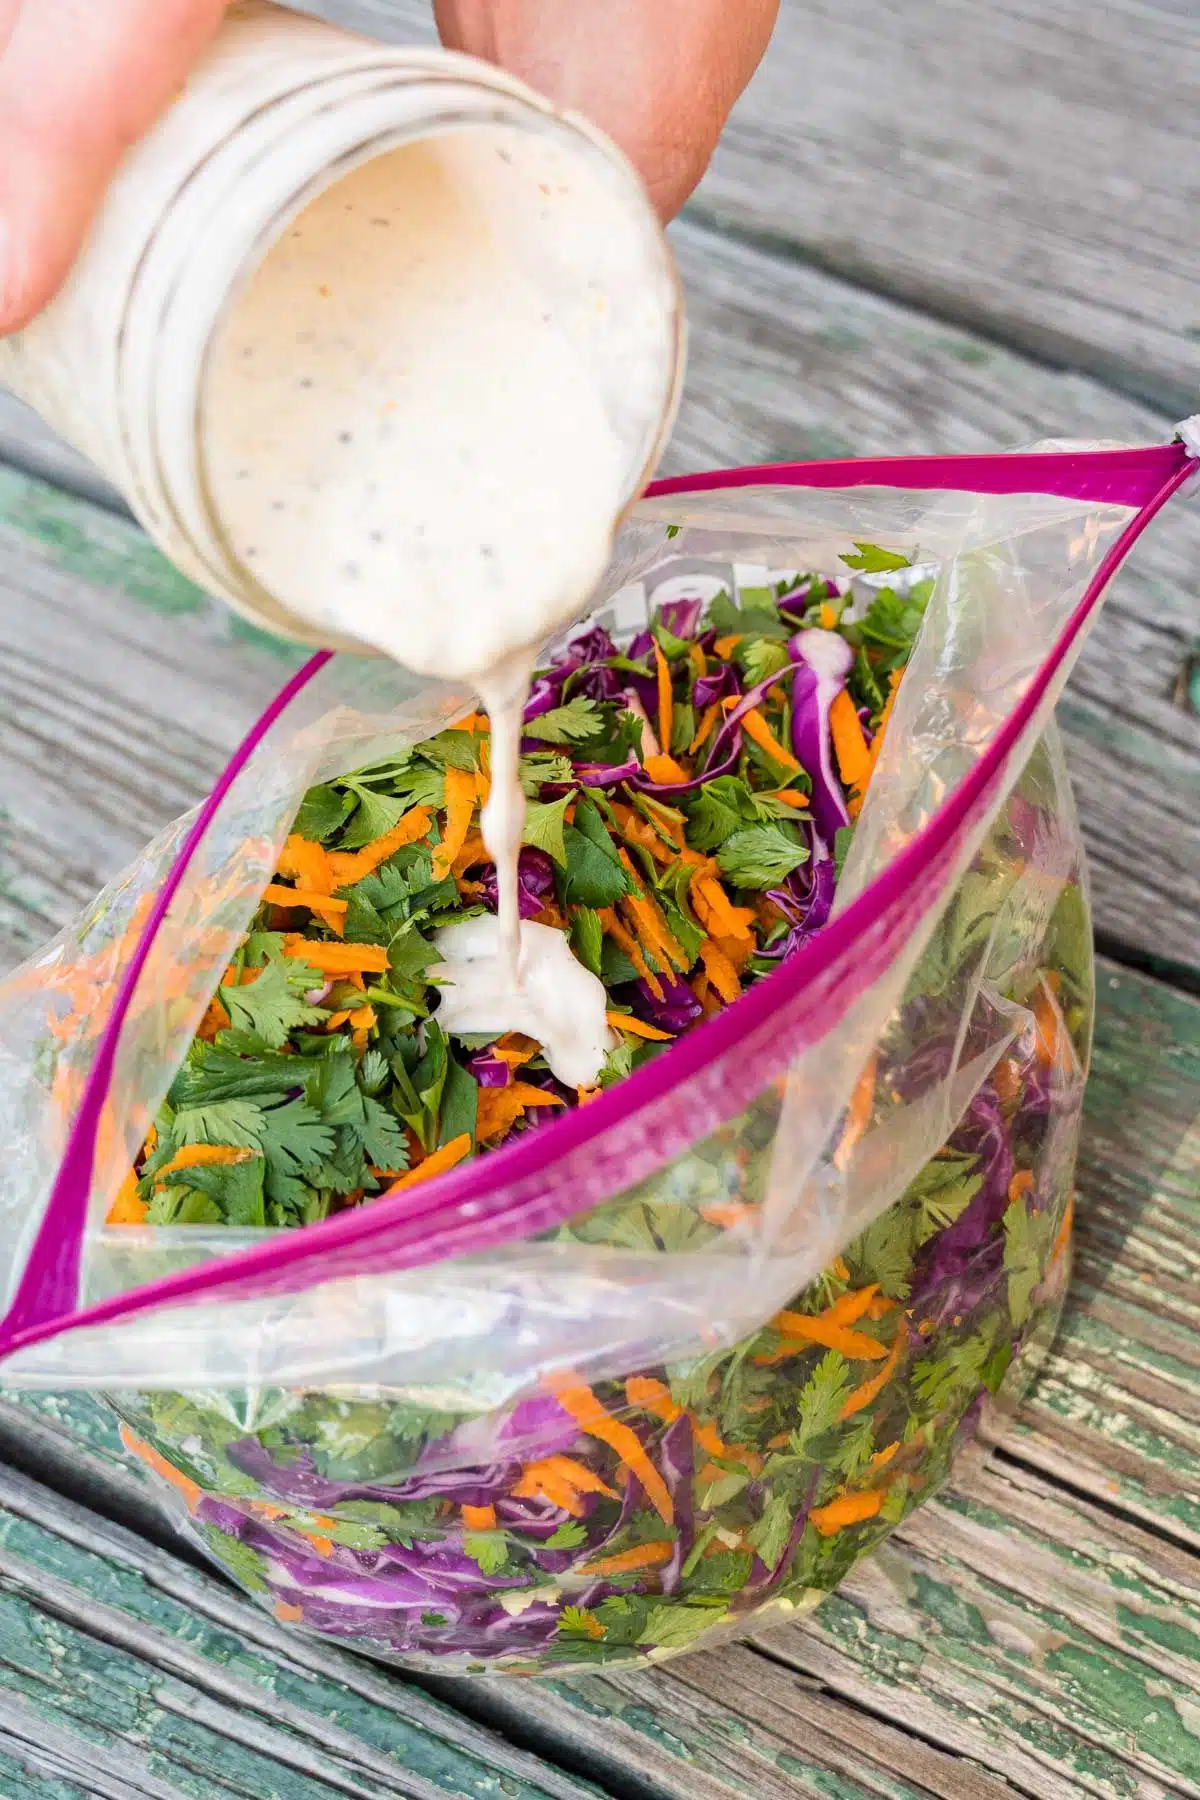 Pouring dressing into a bag with cabbage, carrots, and cilantro.